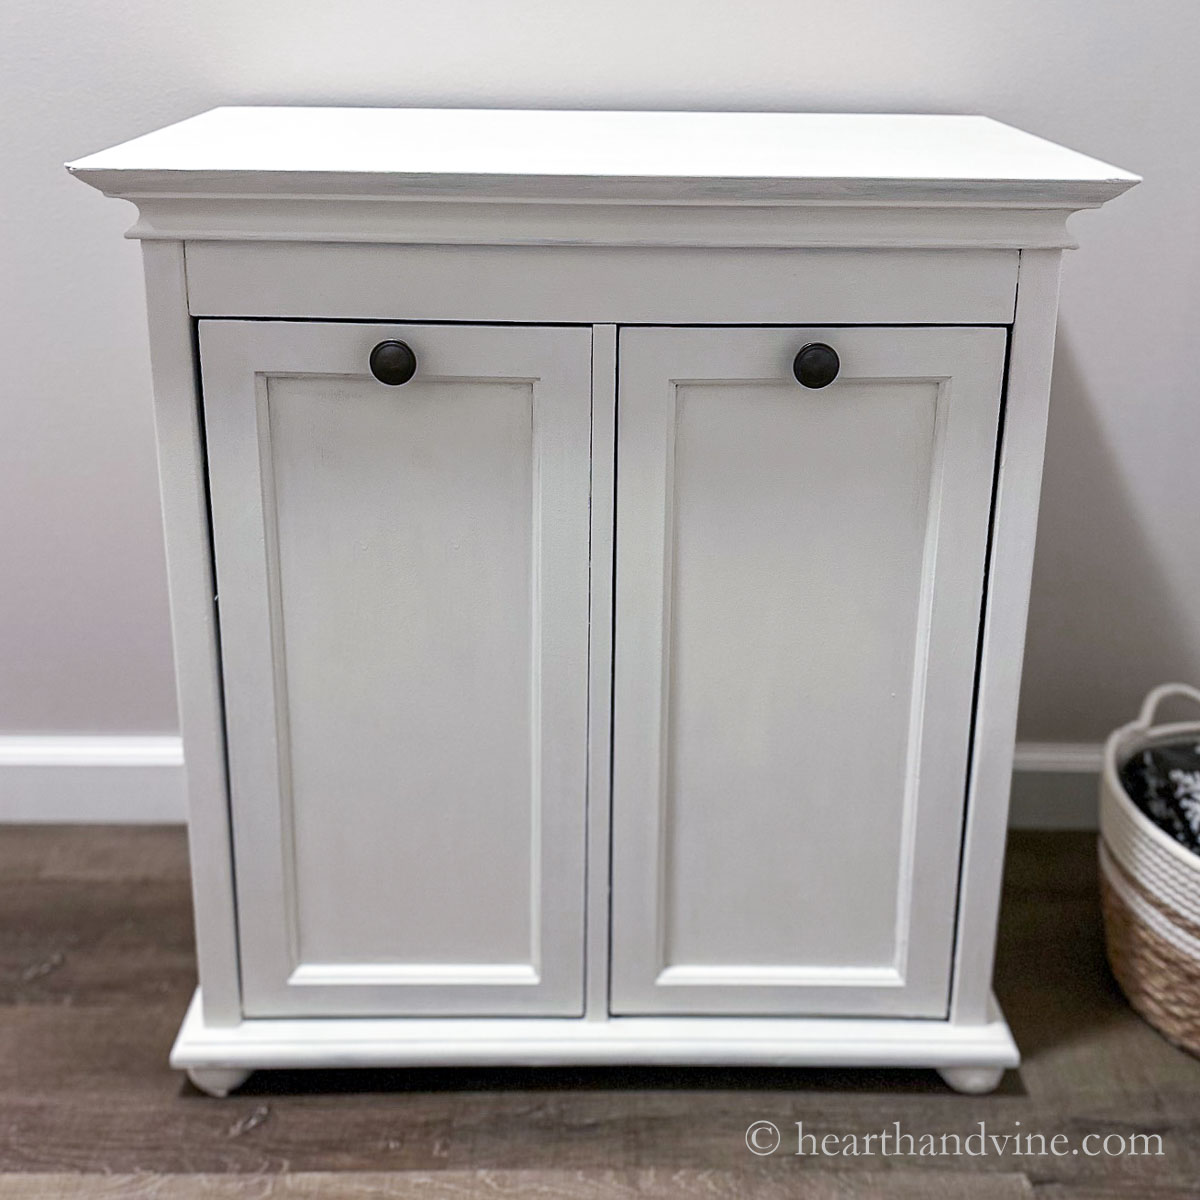 Small white painted cabinet in a bathroom.